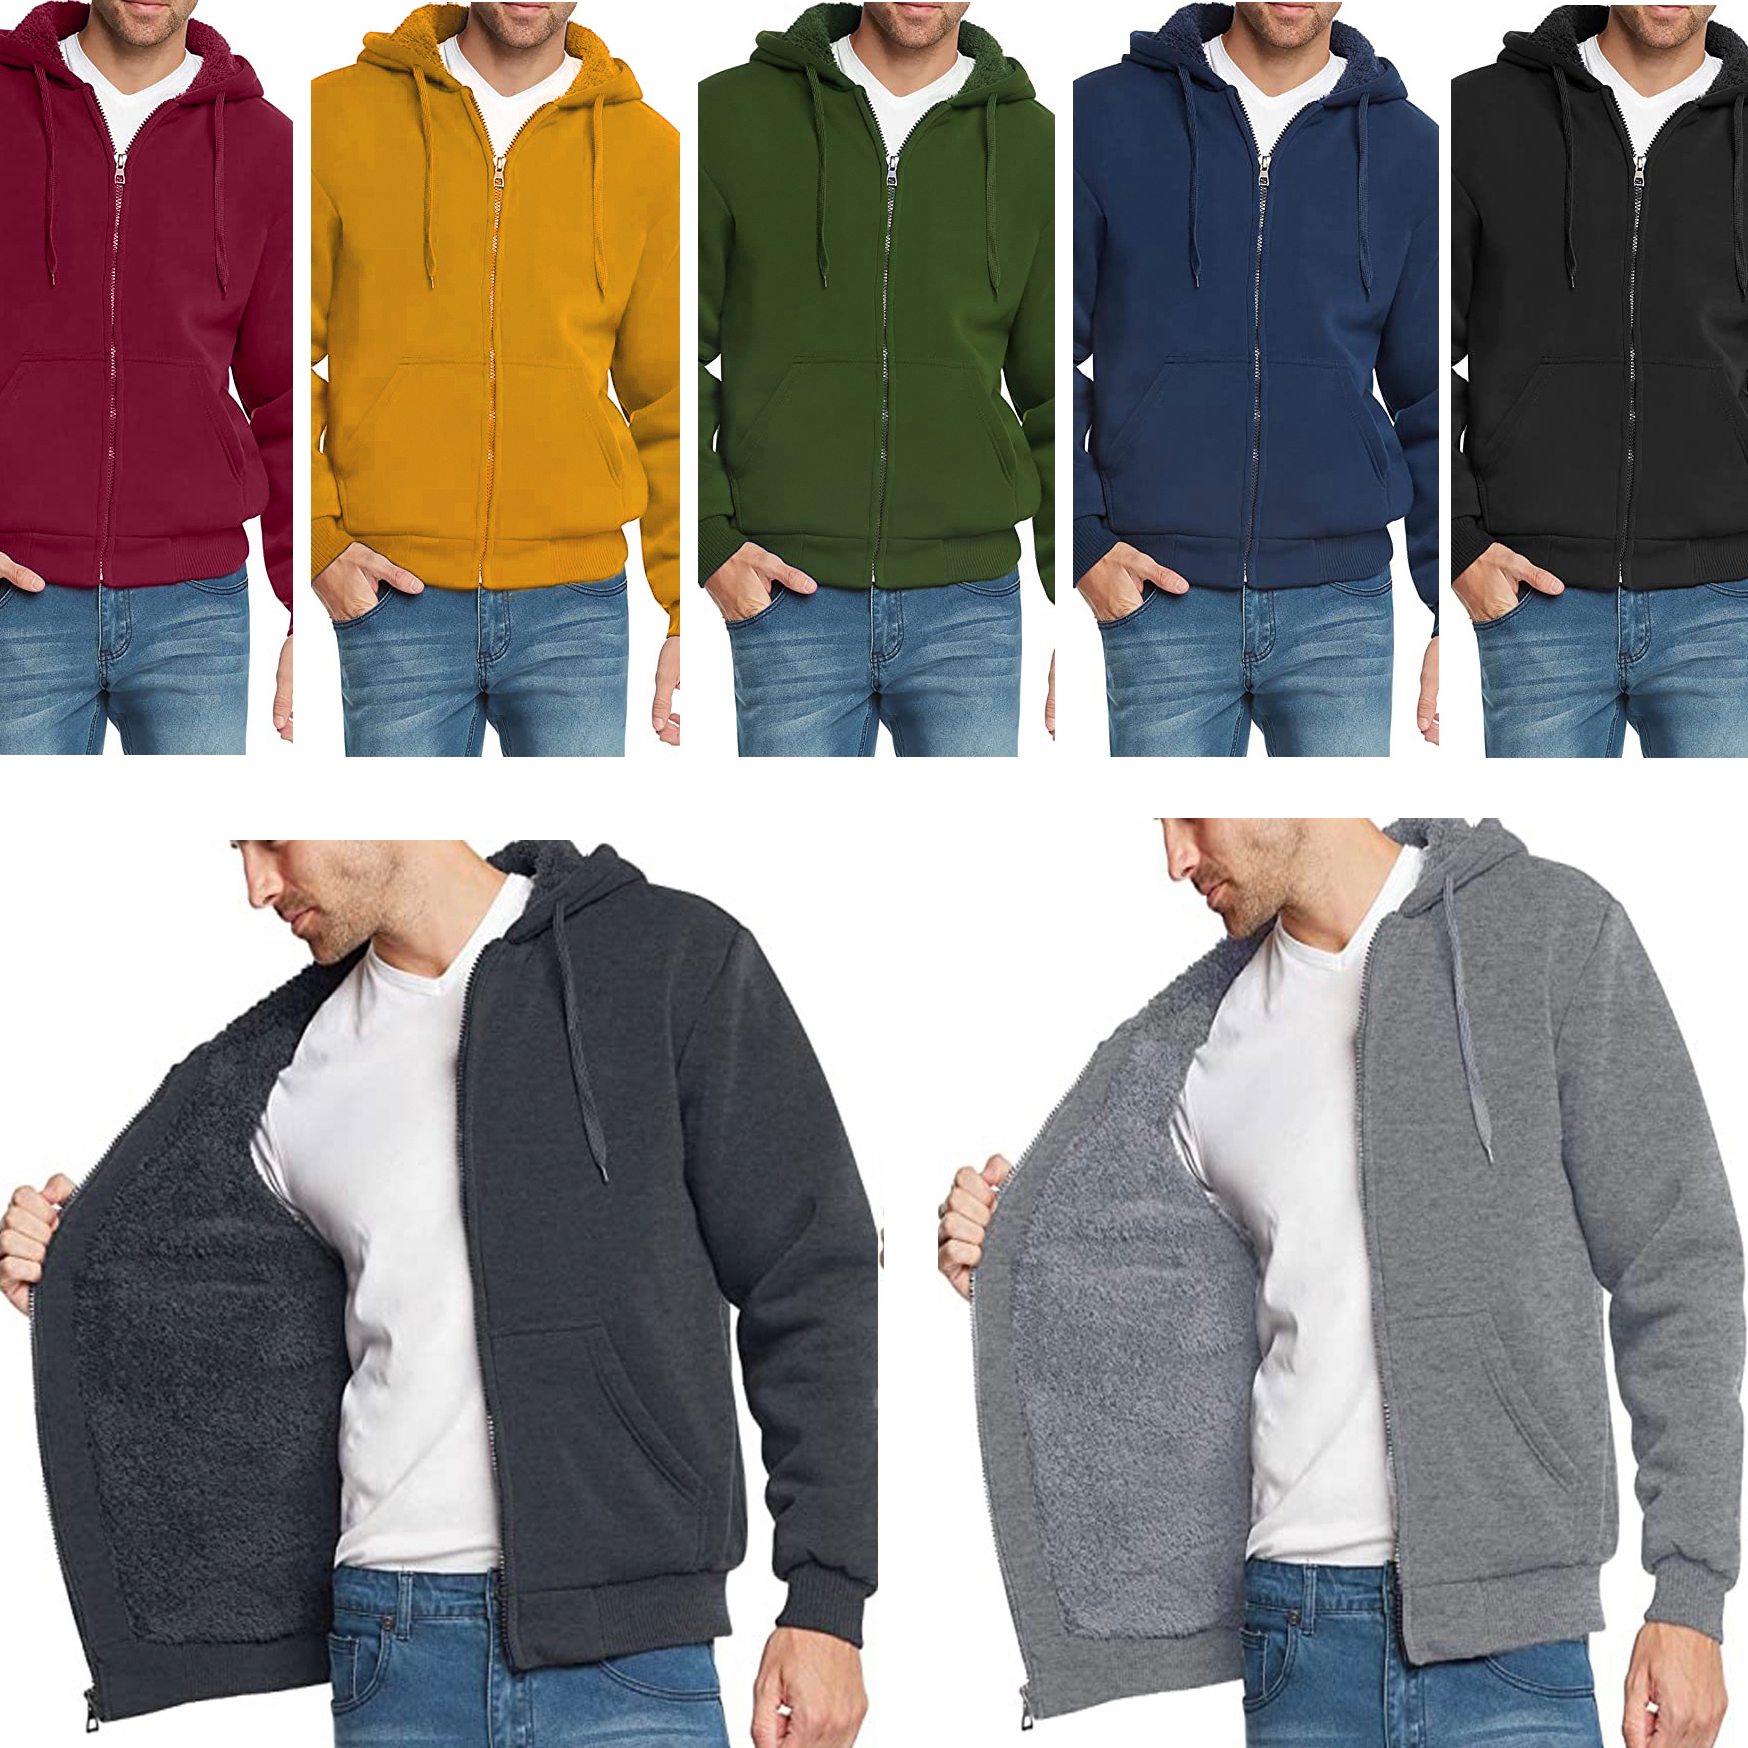 Men's Extra-Thick Sherpa Lined Fleece Hoodie (Big & Tall Sizes Available) - Navy, XX-Large